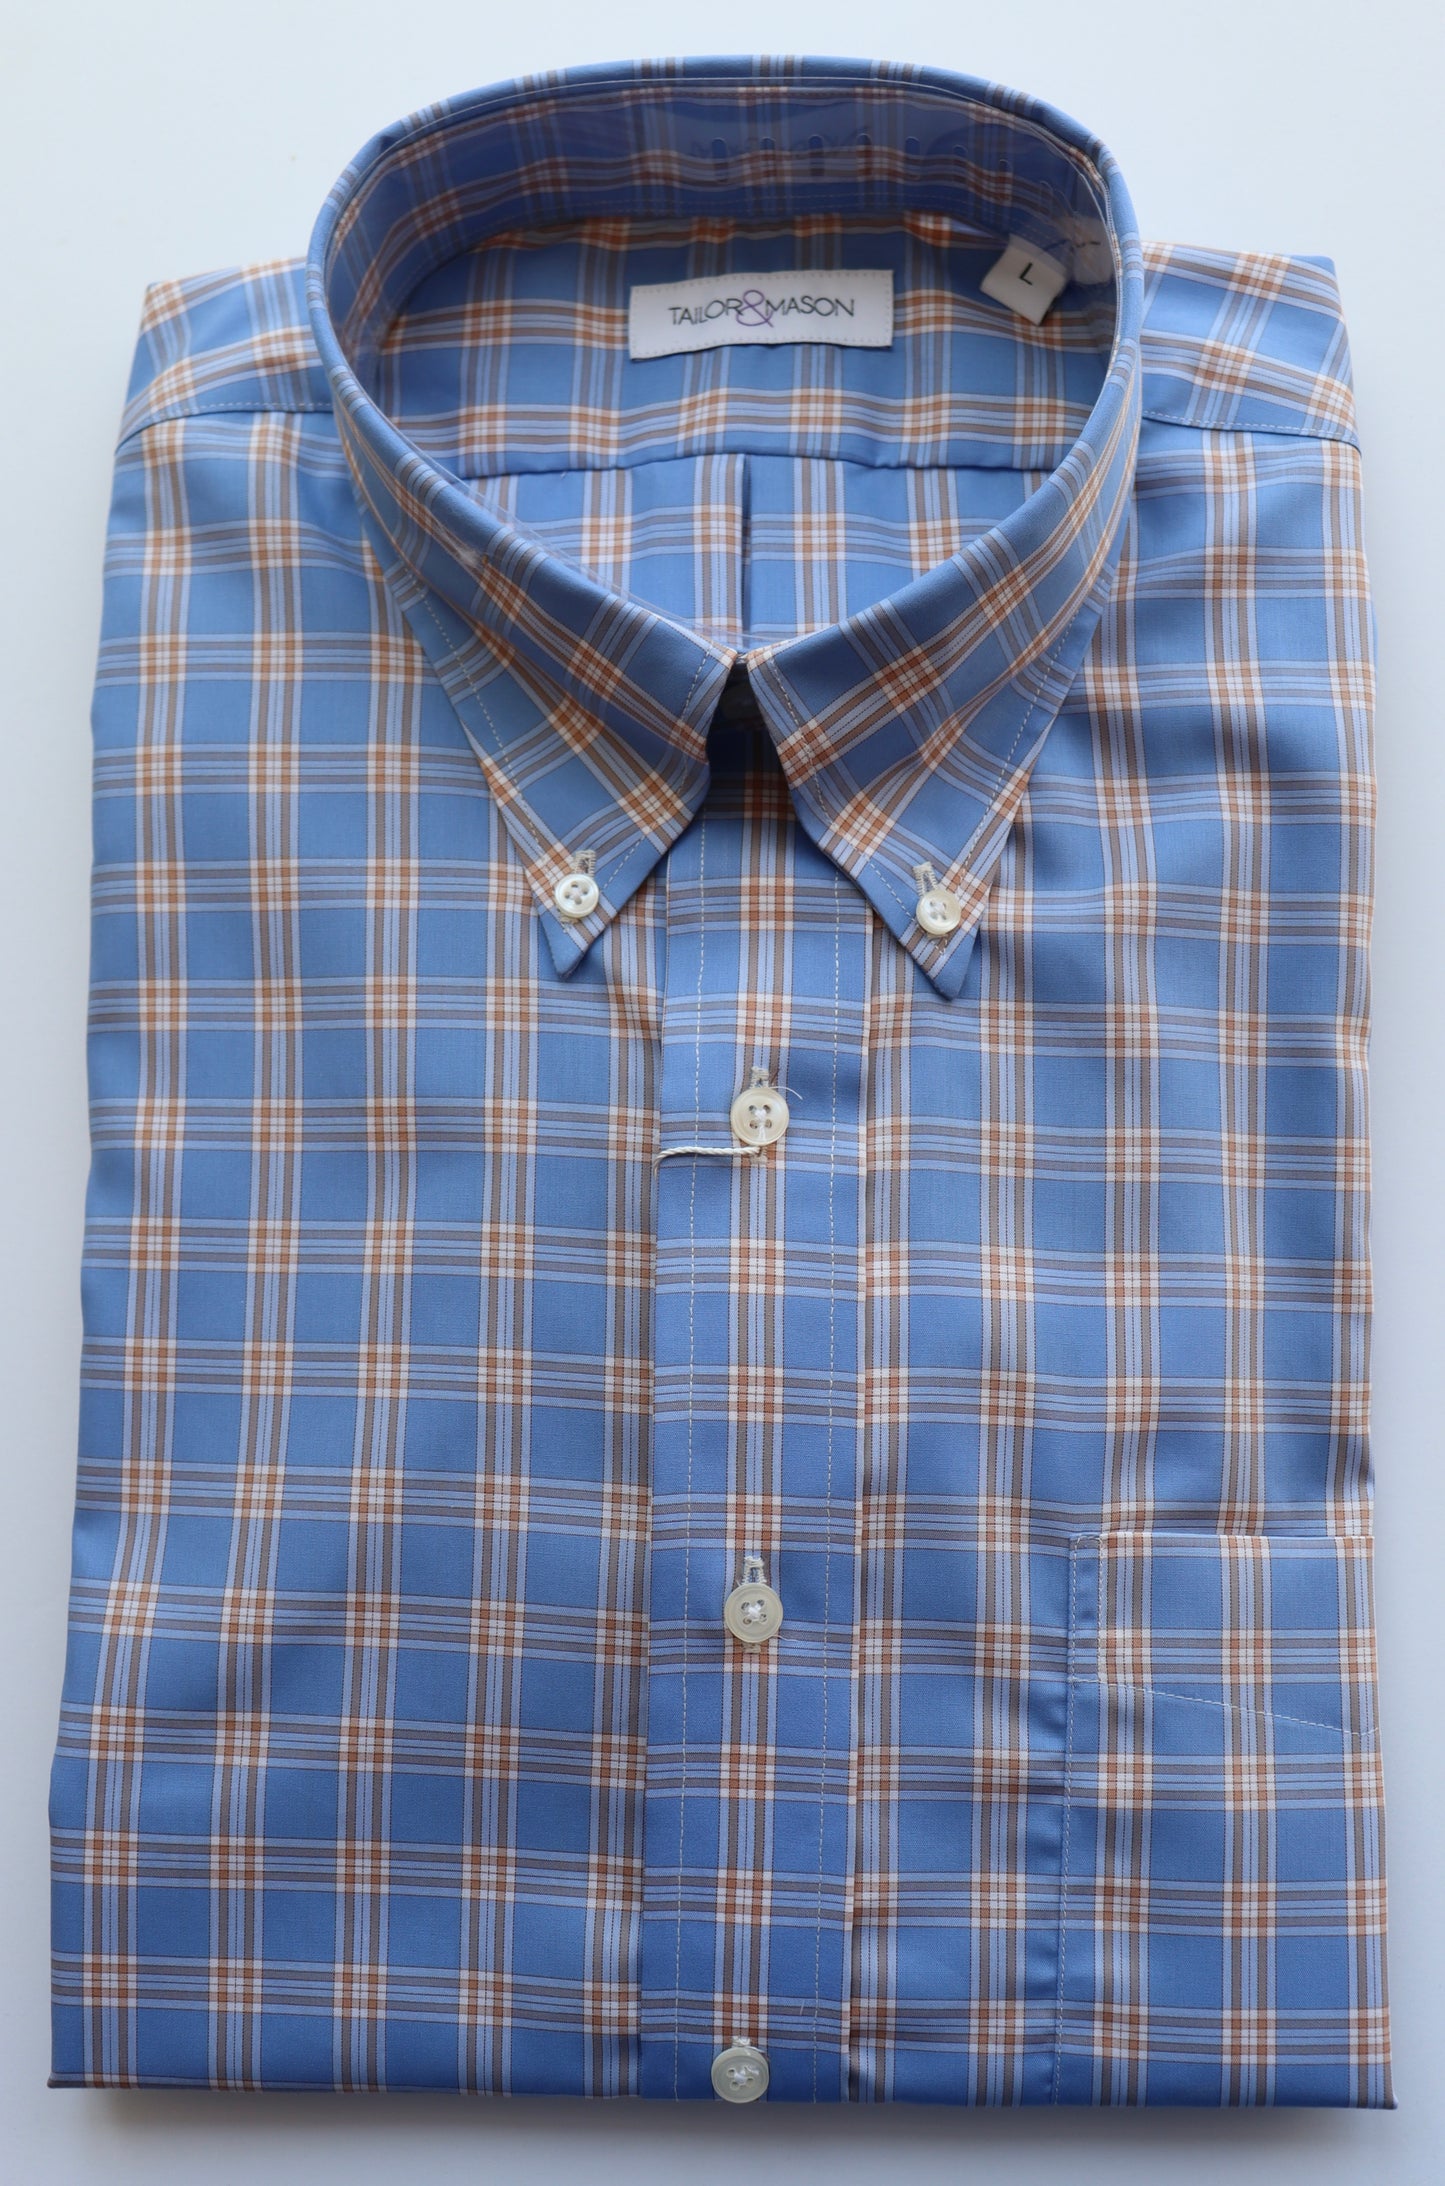 The Shirt Shop Wrinkle Free Button Down - Jack